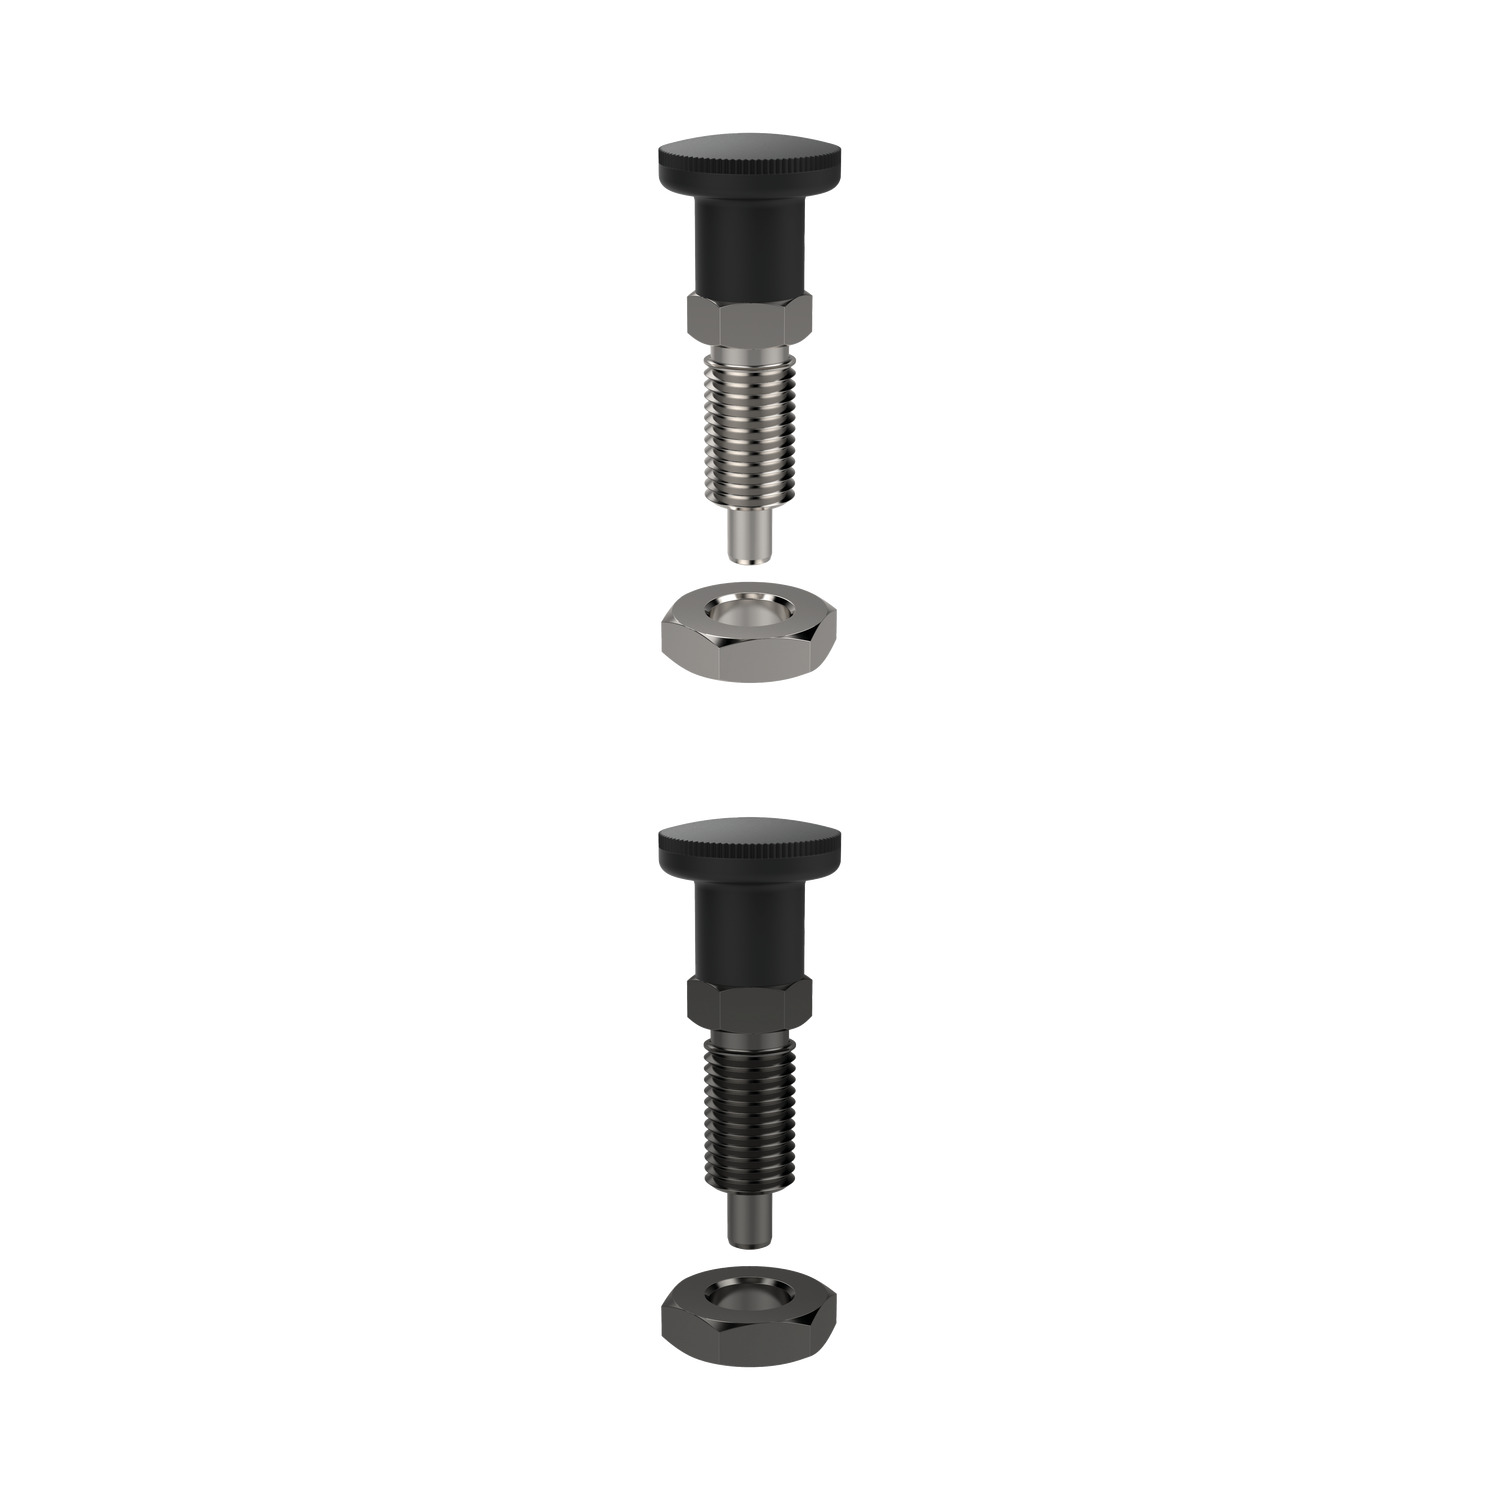 Index Plungers - Pull Grip Wixroyd's compact non-locking index plunger includes a thread recess for full engagement of thread length.